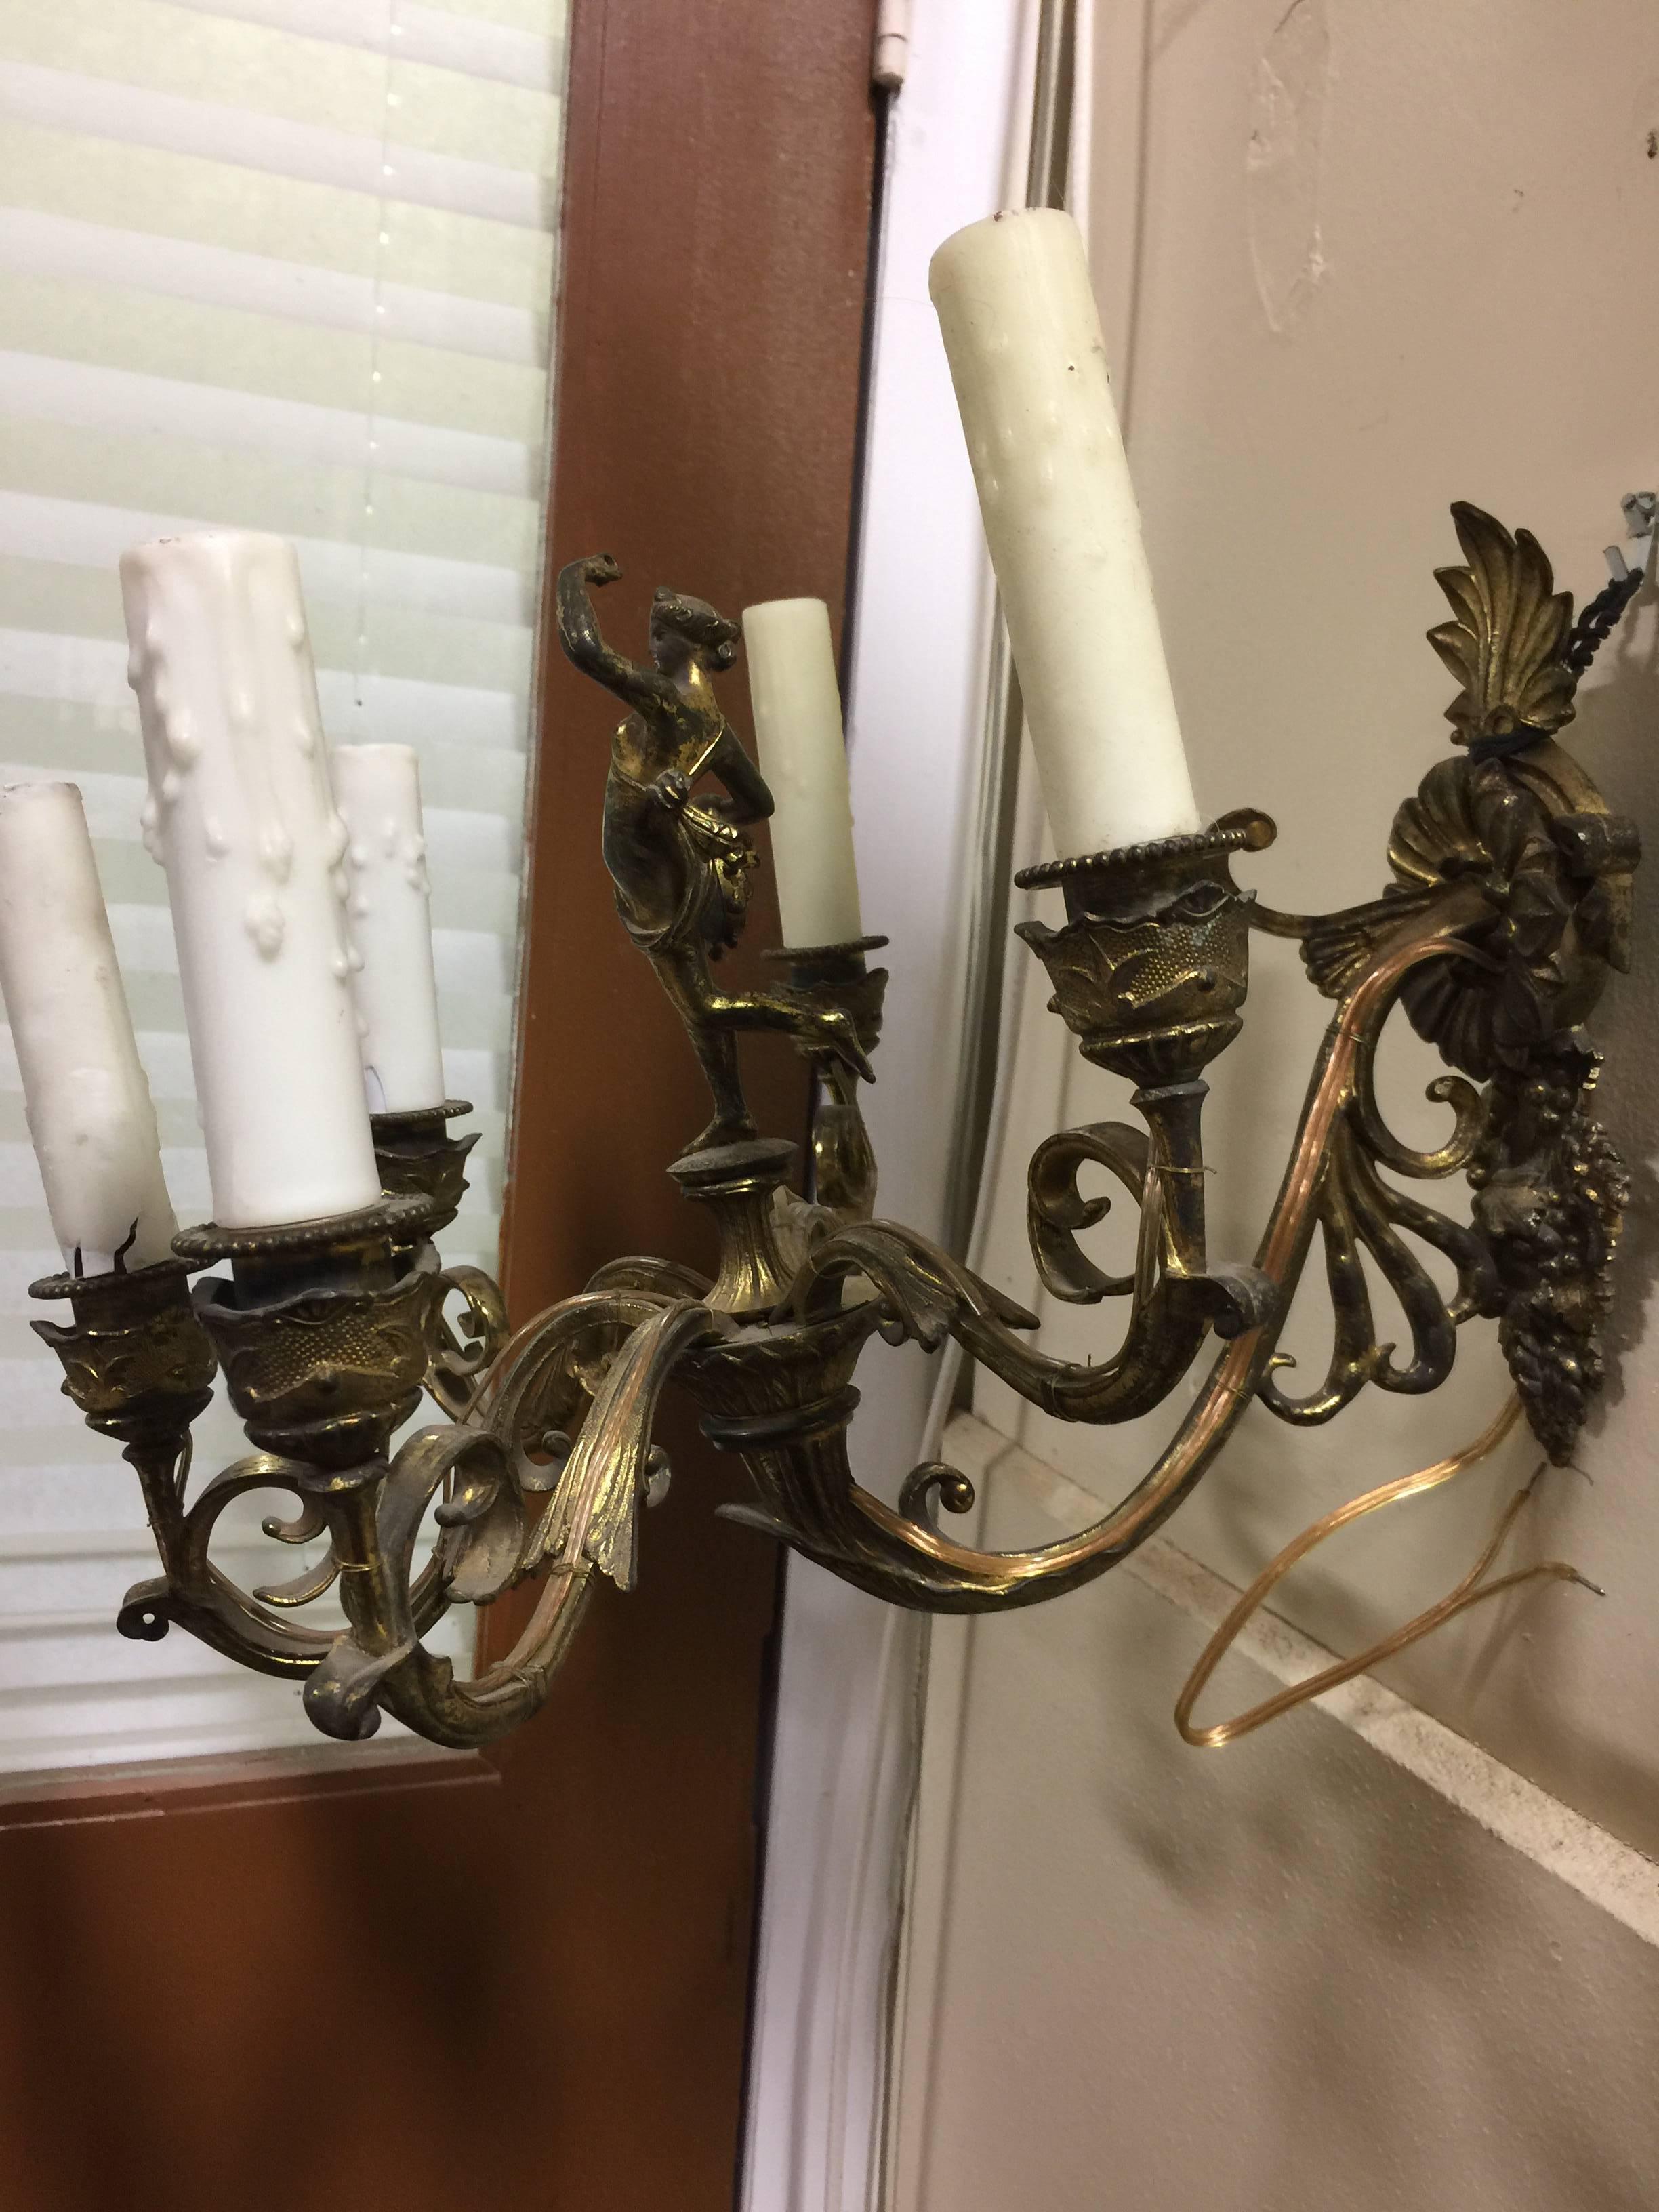 Pair of 19th century French bronze sconces rewired American.